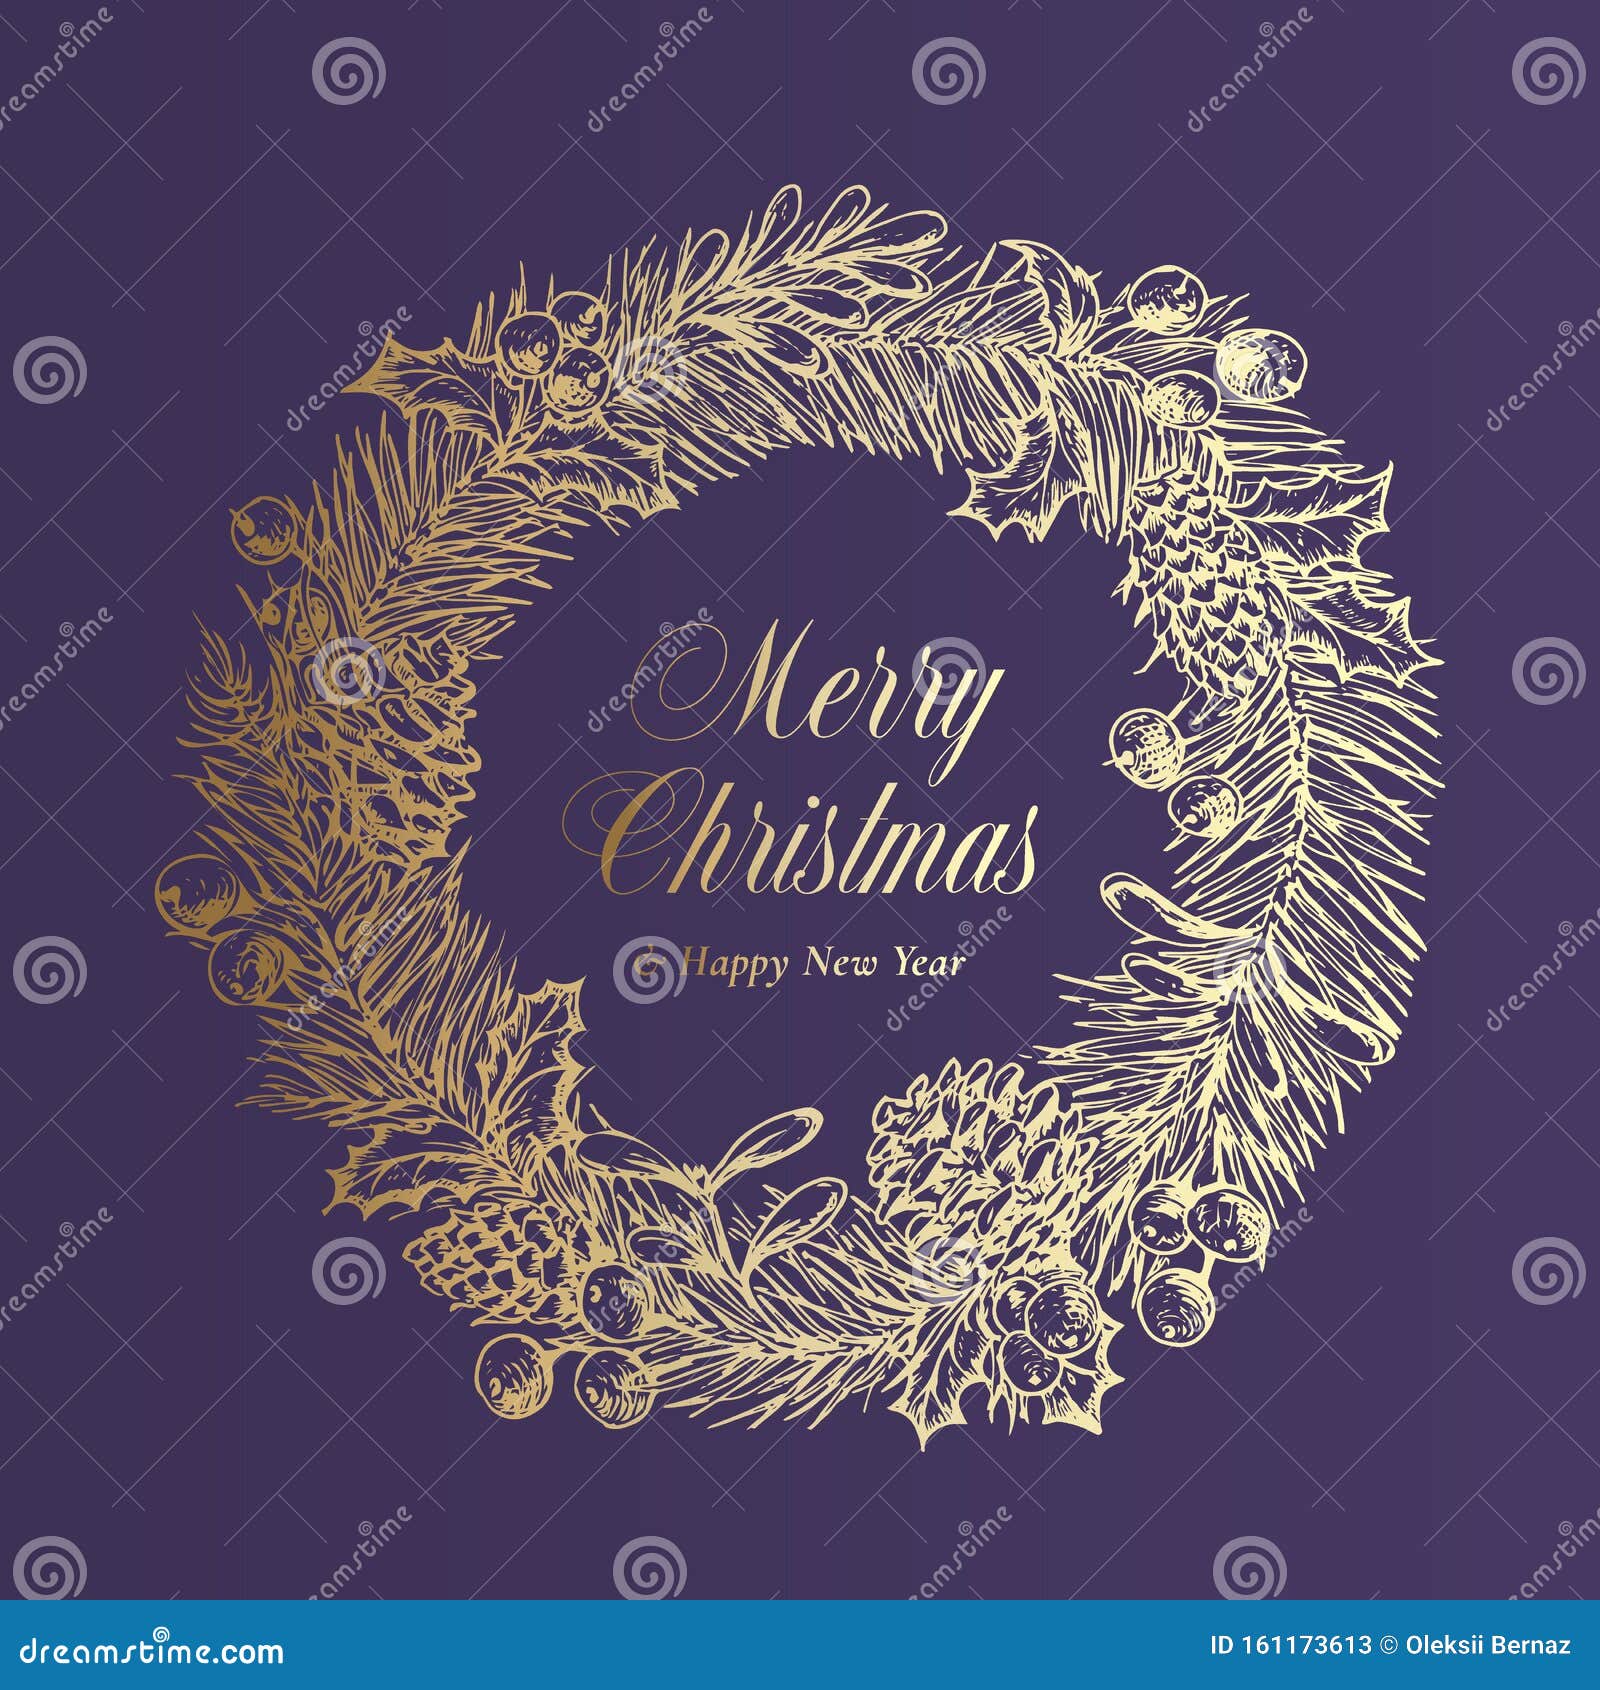 christmas greetings advert  banner template. winter holiday  doodle sketch wreath on purple background. xmas